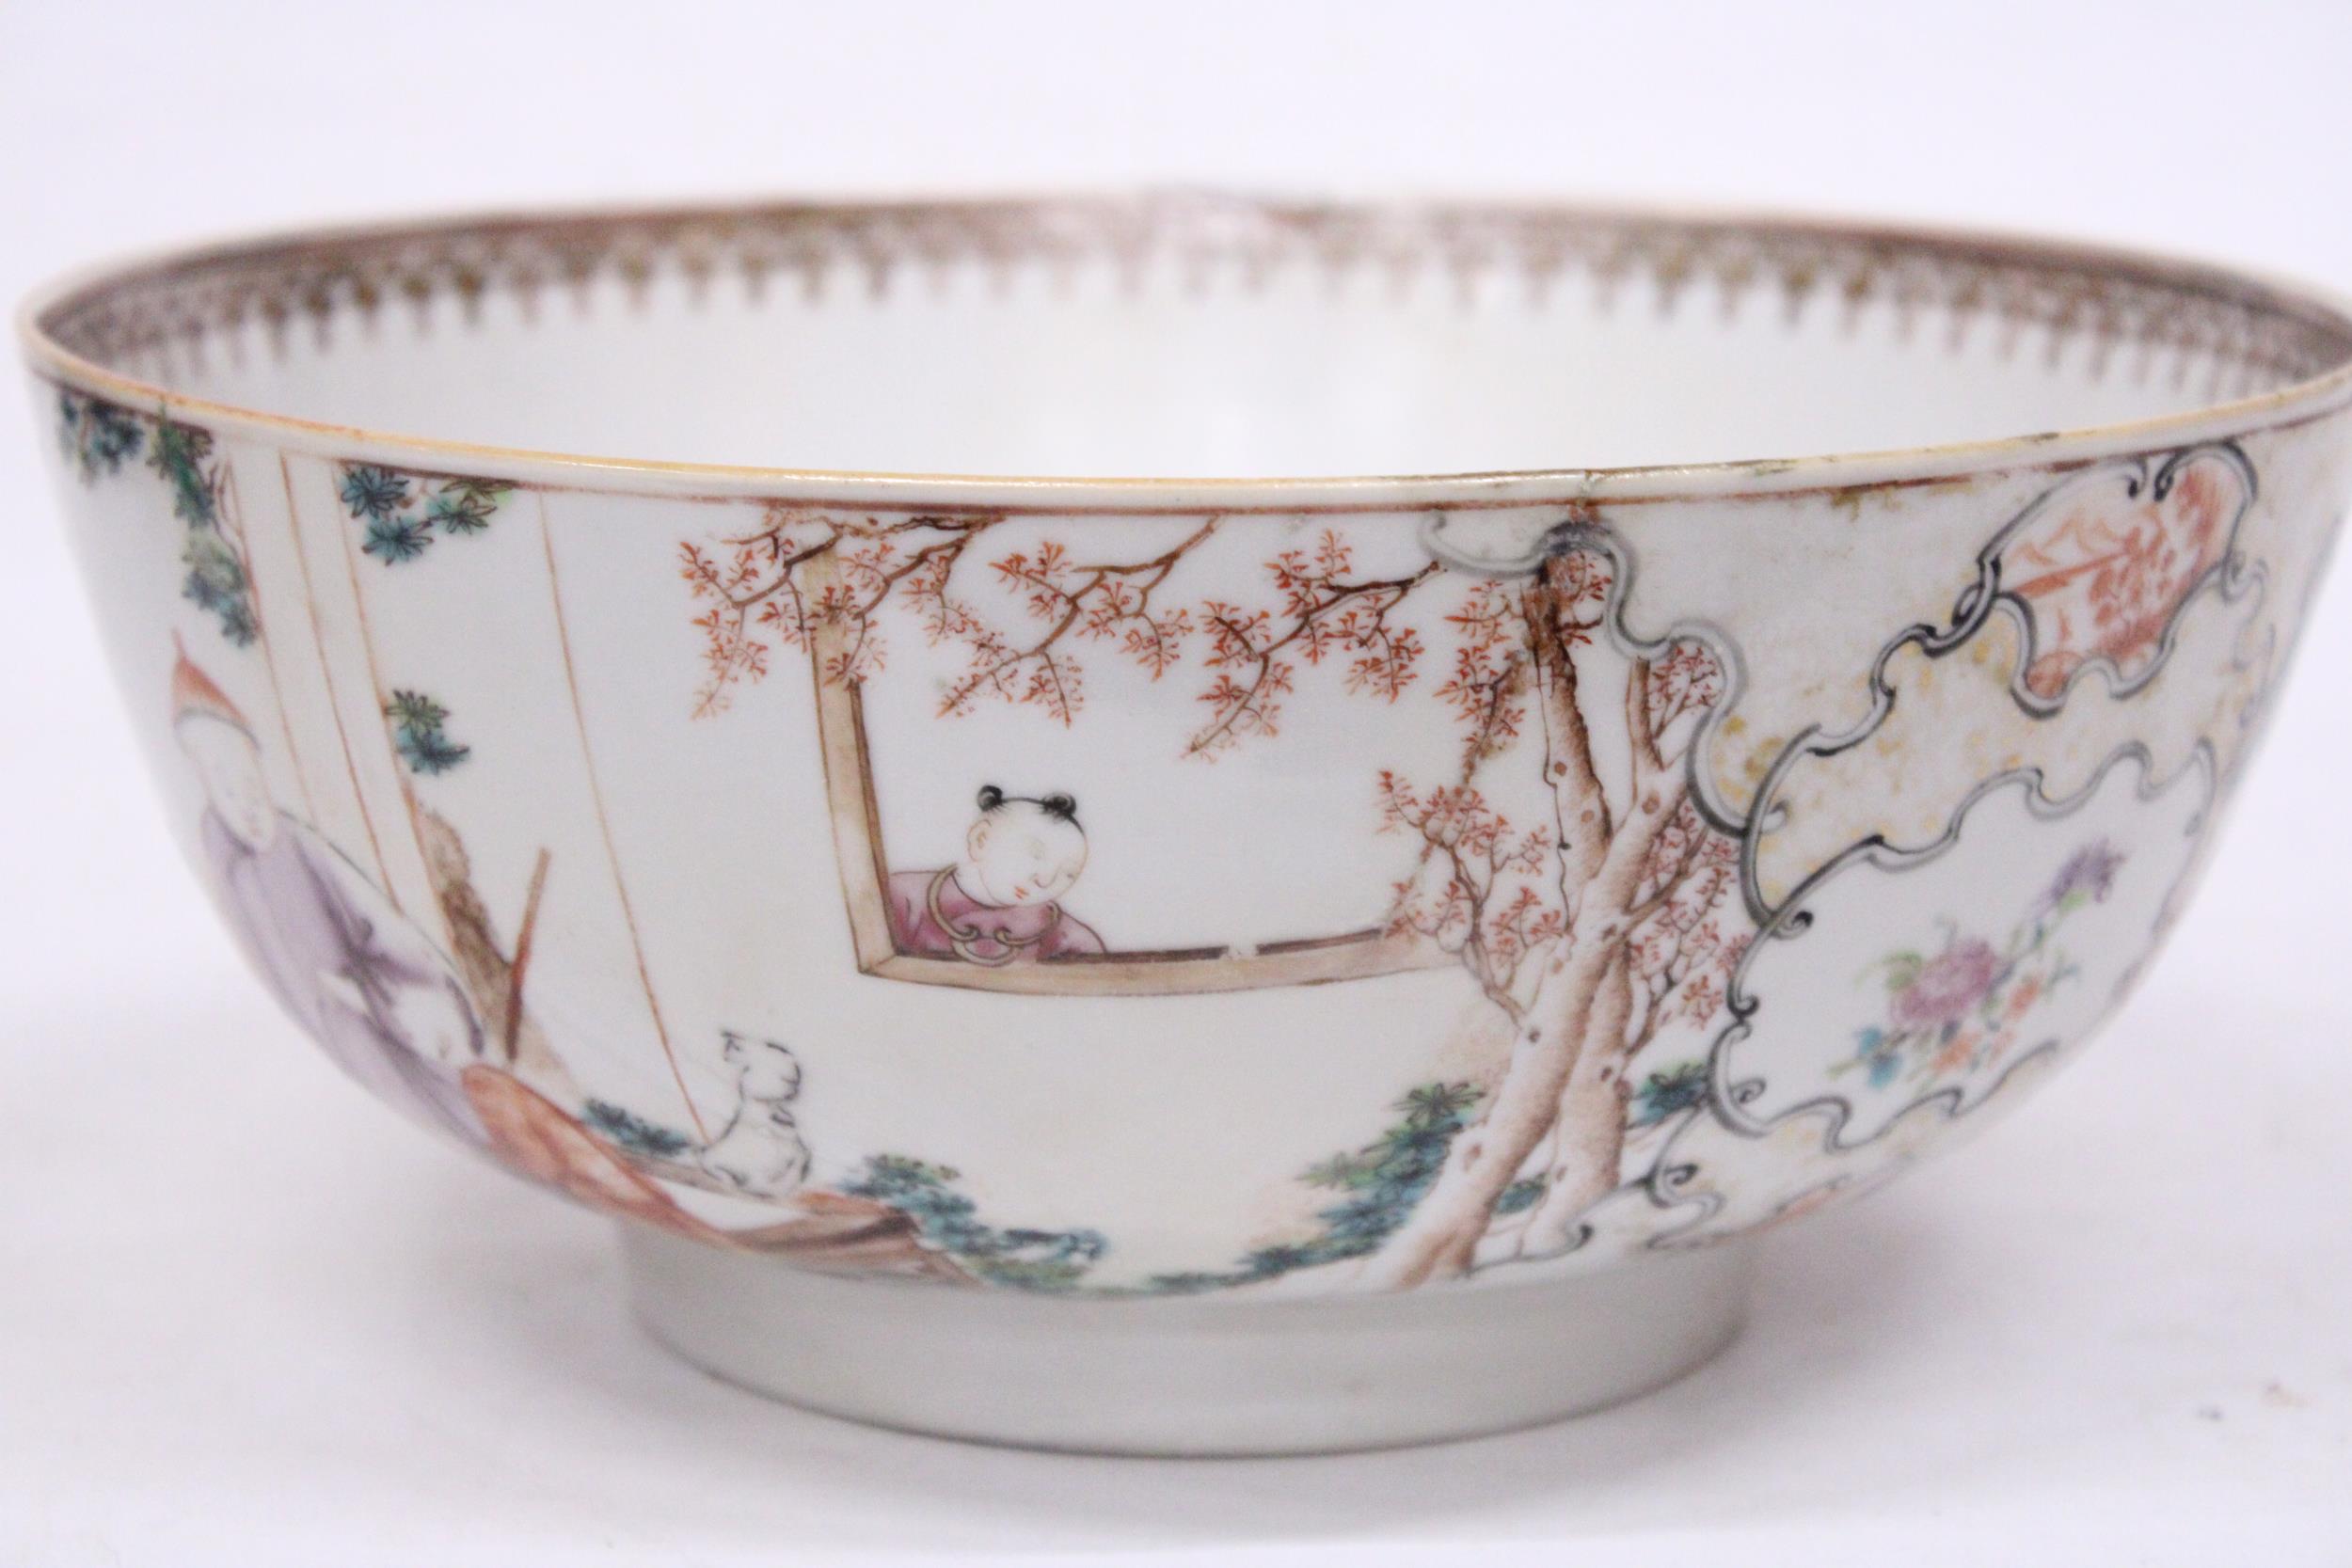 A CHINESE EXPORT FIGURAL DESIGN FOOTED BOWL - 11 CM (H) - 25.5 (D) - Image 5 of 7